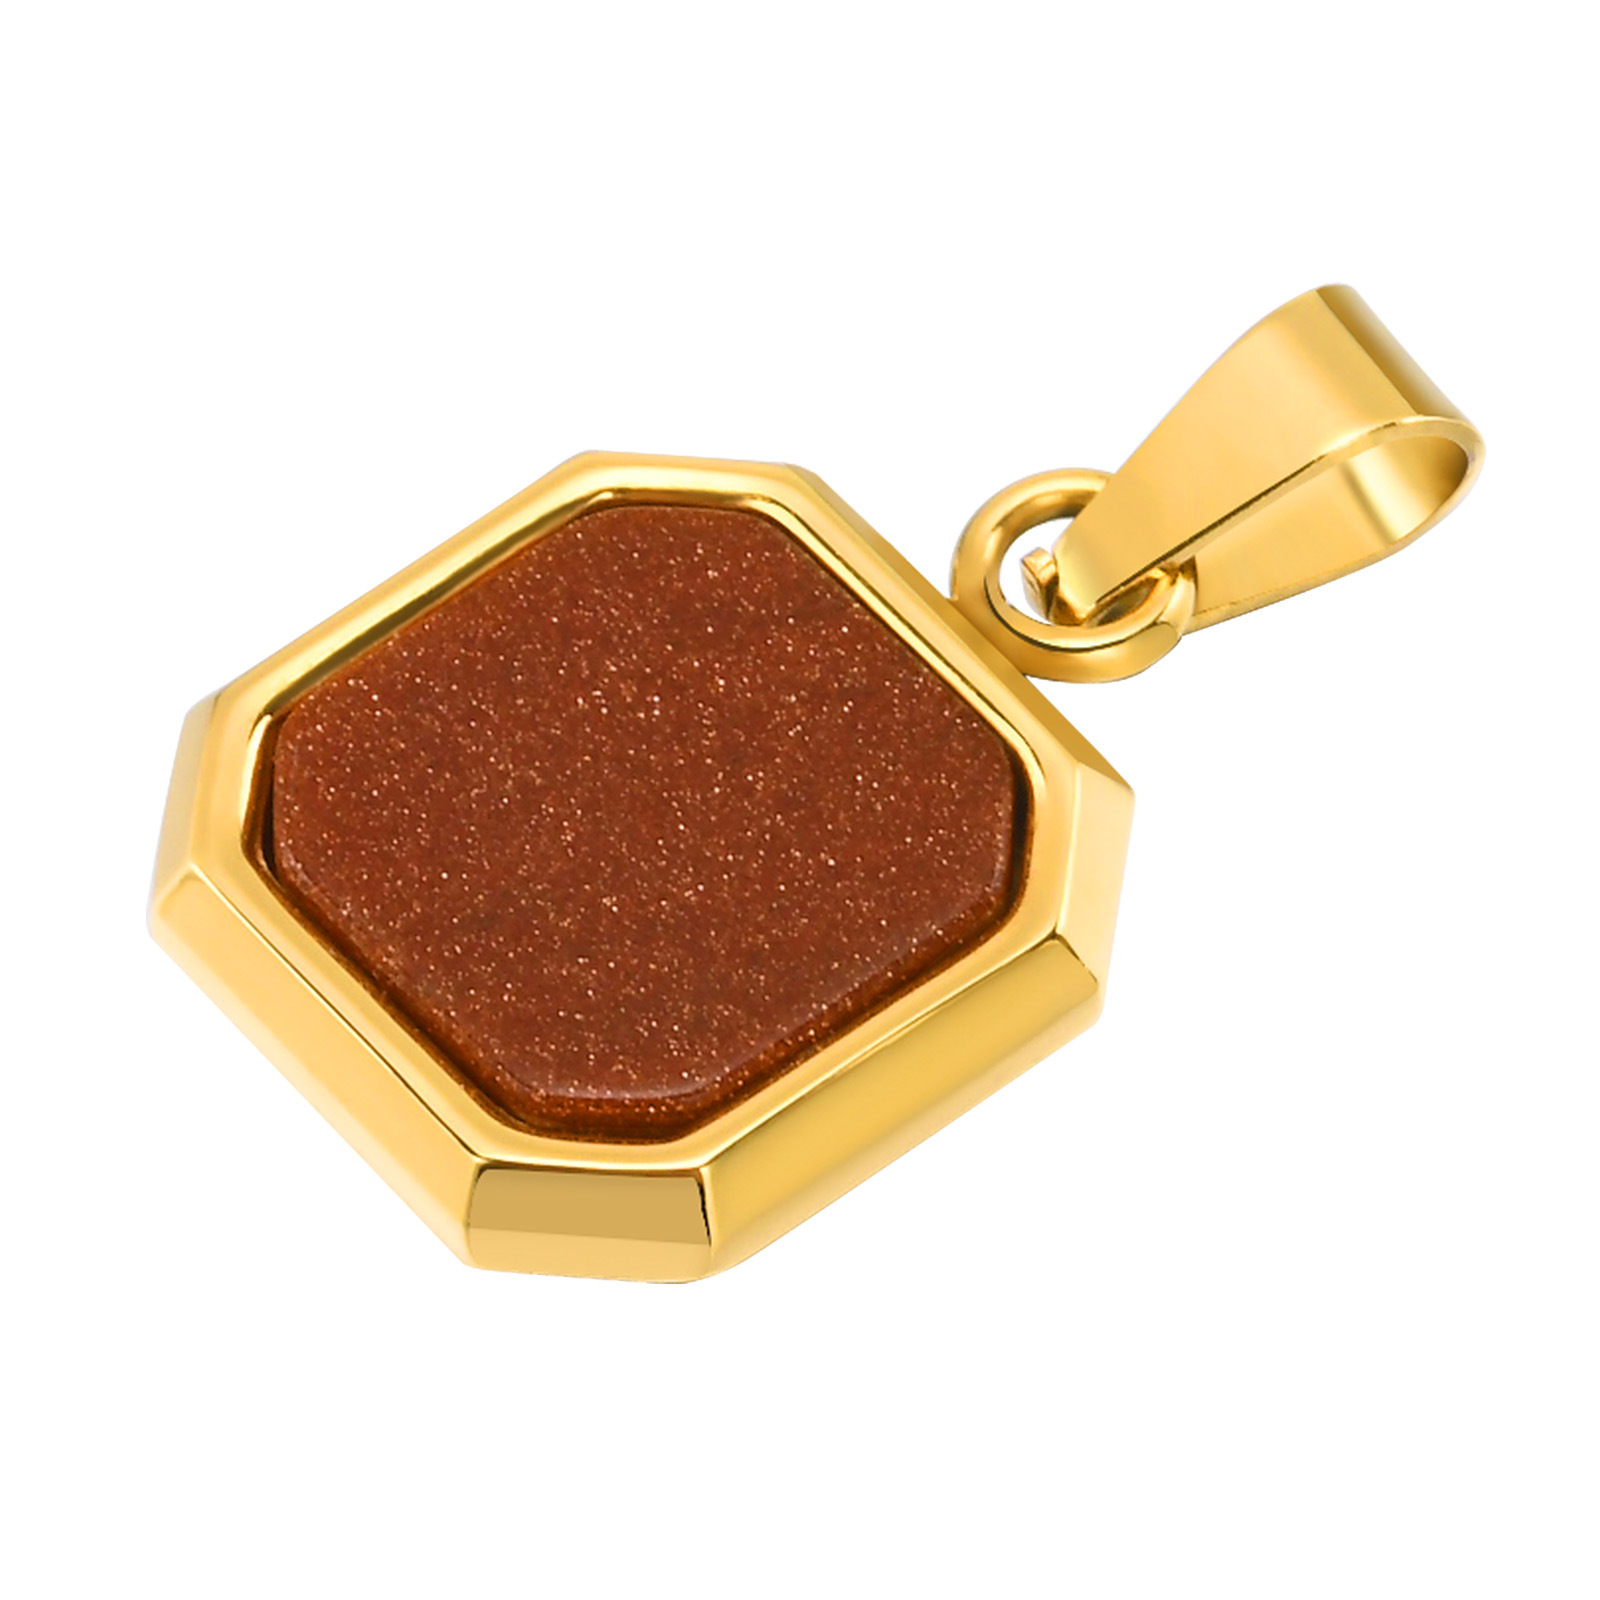 18:Red sand stone pendant, no matching chain